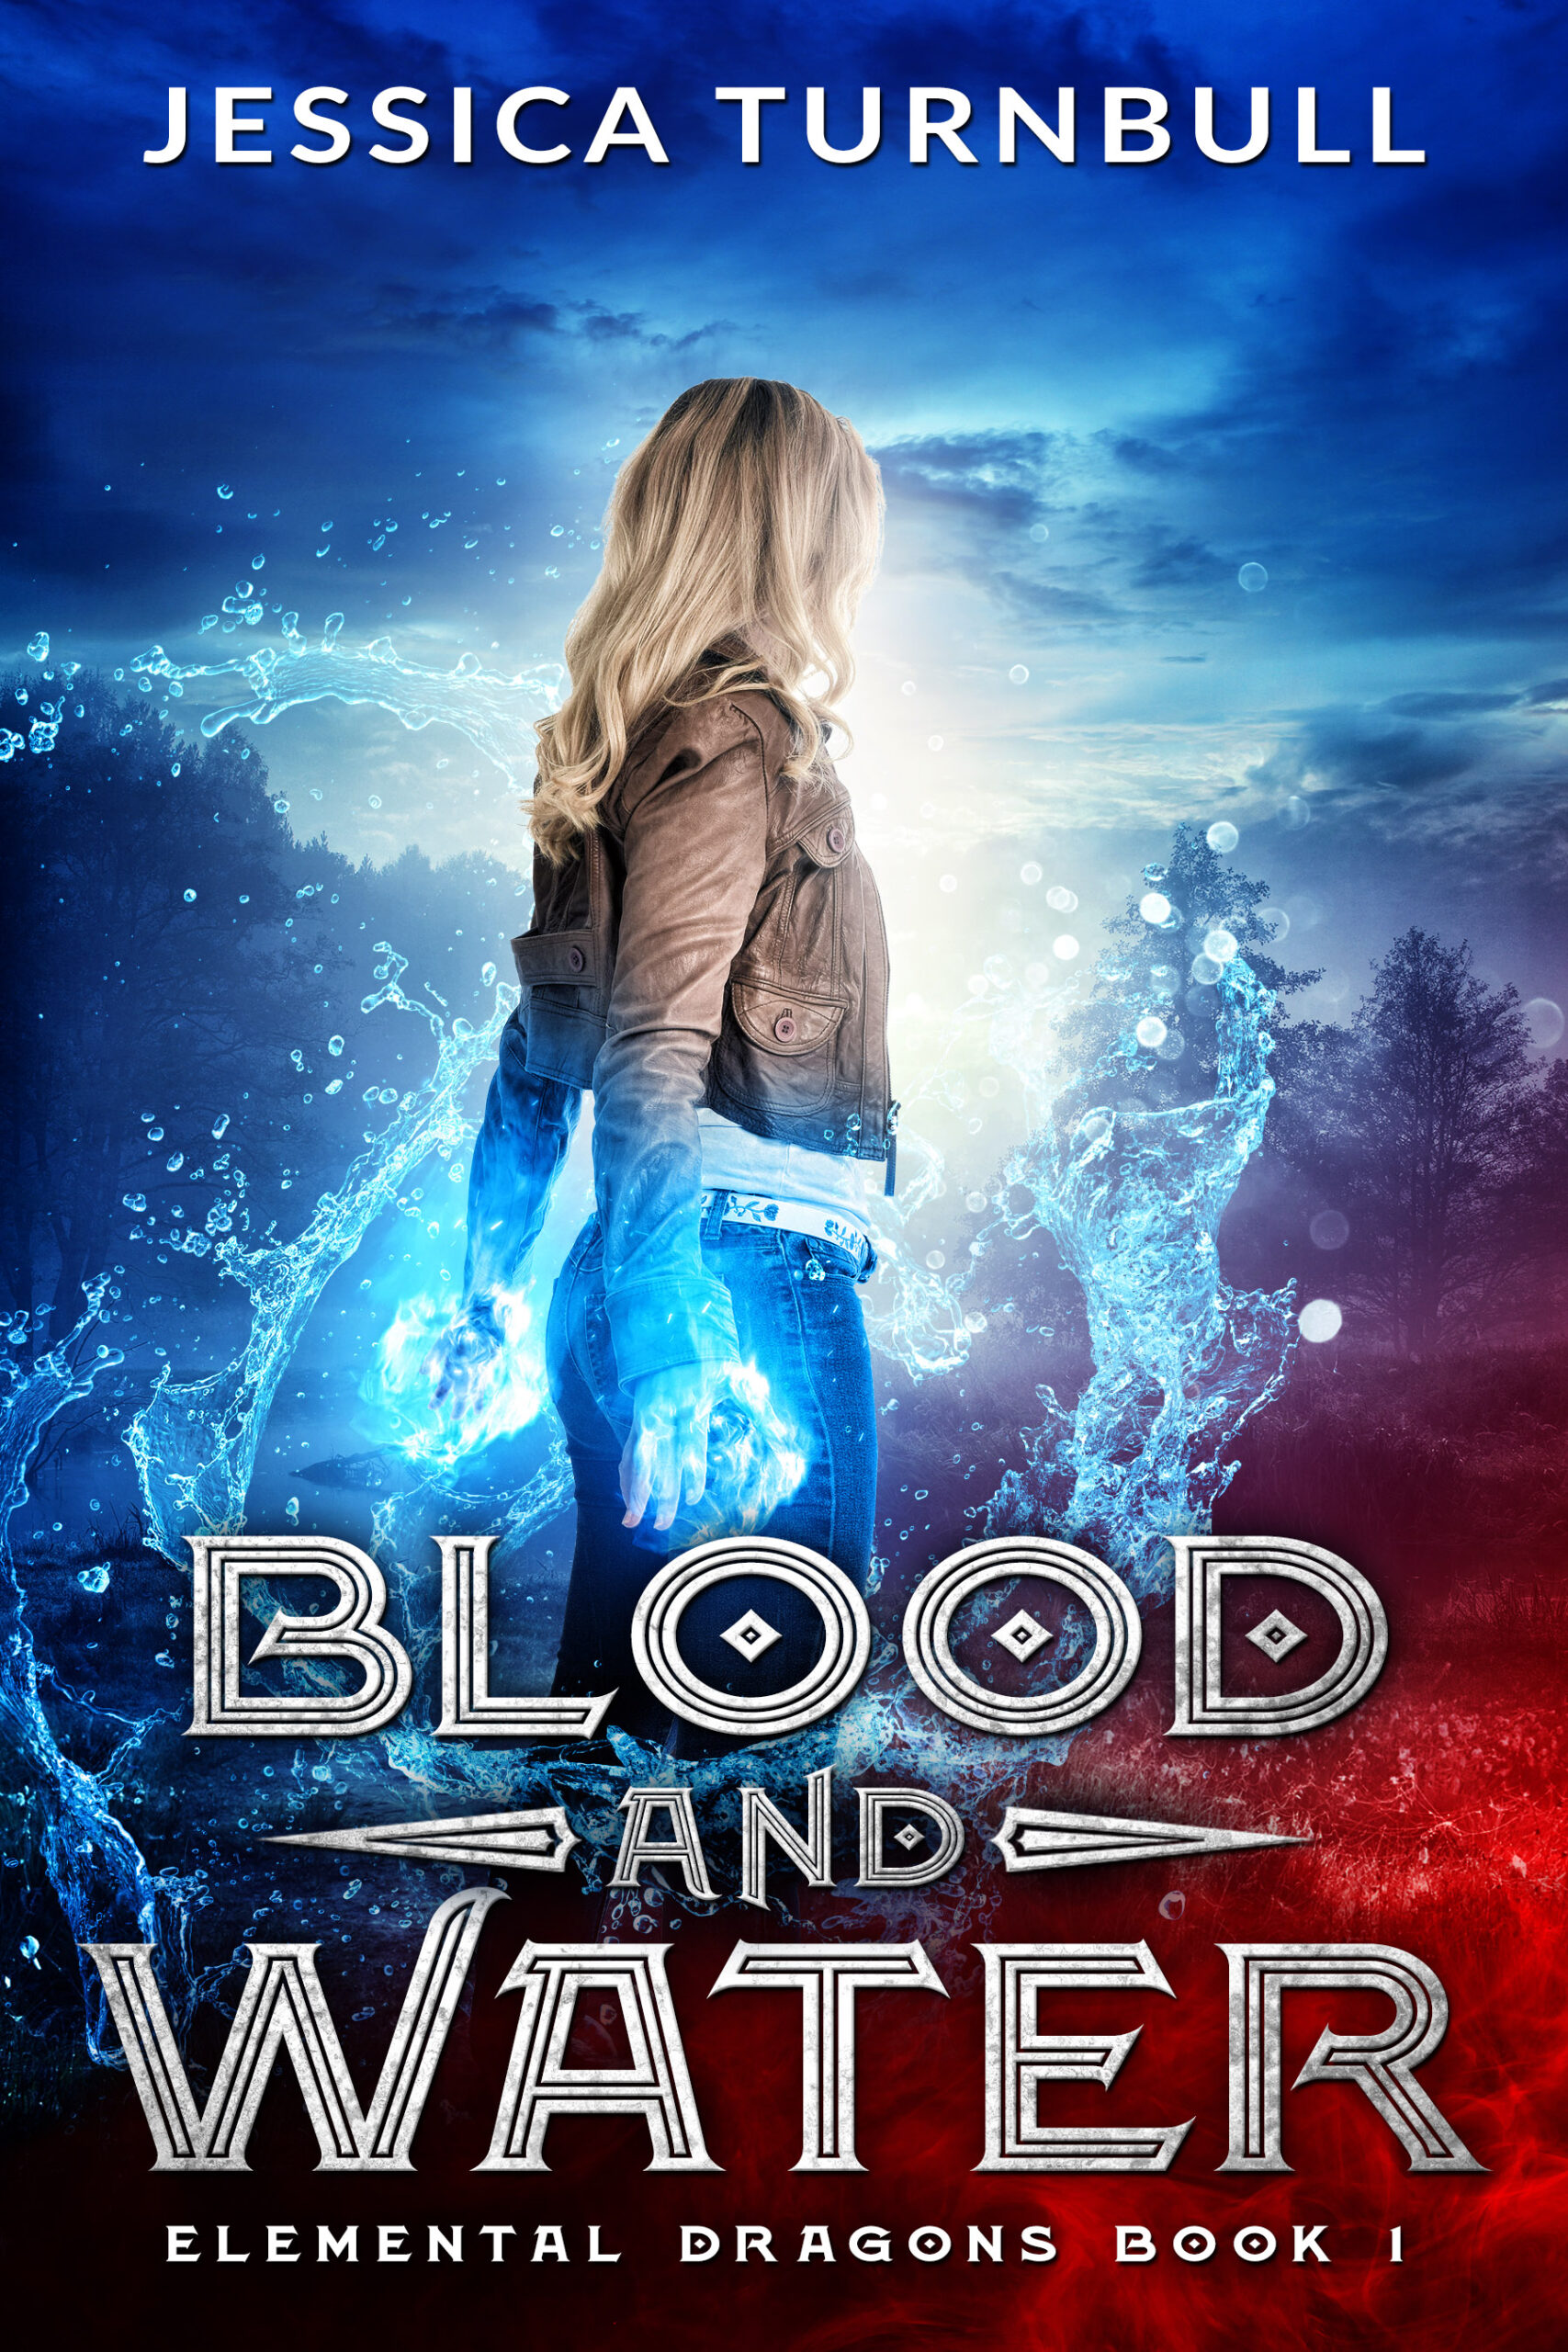 FREE: Elemental Dragons Book 1: Blood and Water by Jessica Turnbull